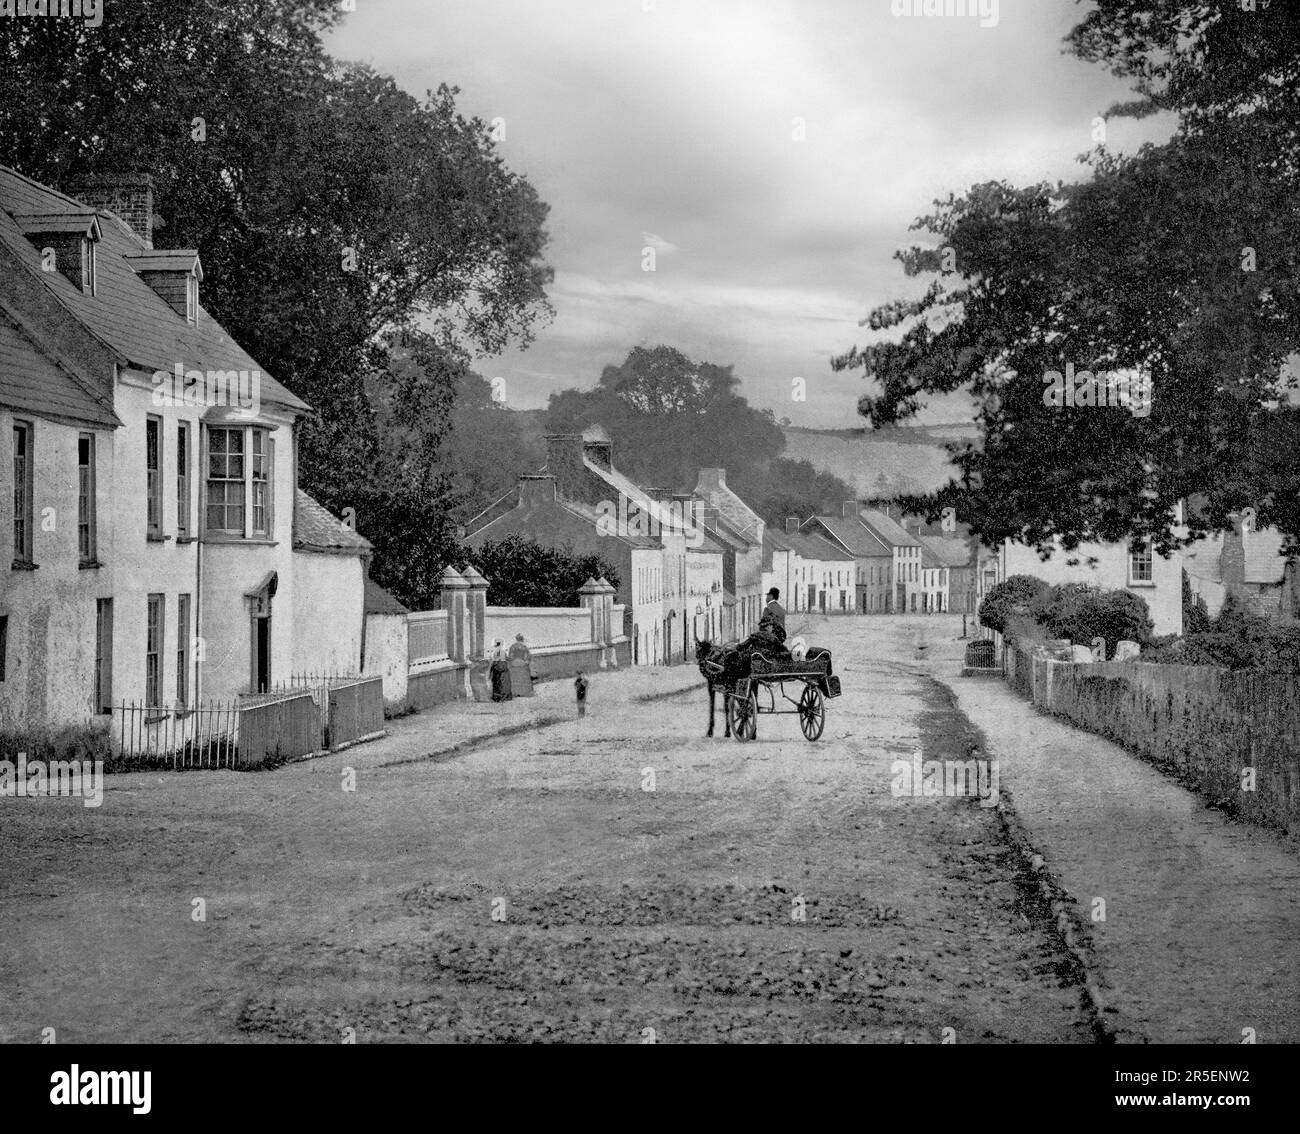 A late 19th century view of a jaunting car in the main street of Inishannon, then little more than a hamlet. Now it is a large village on the main Cork–Bandon road (N71) in County Cork, Ireland. Situated on the River Bandon, the village has since grown due to its proximity to Cork city, and is now a dormitory town for city workers. Stock Photo